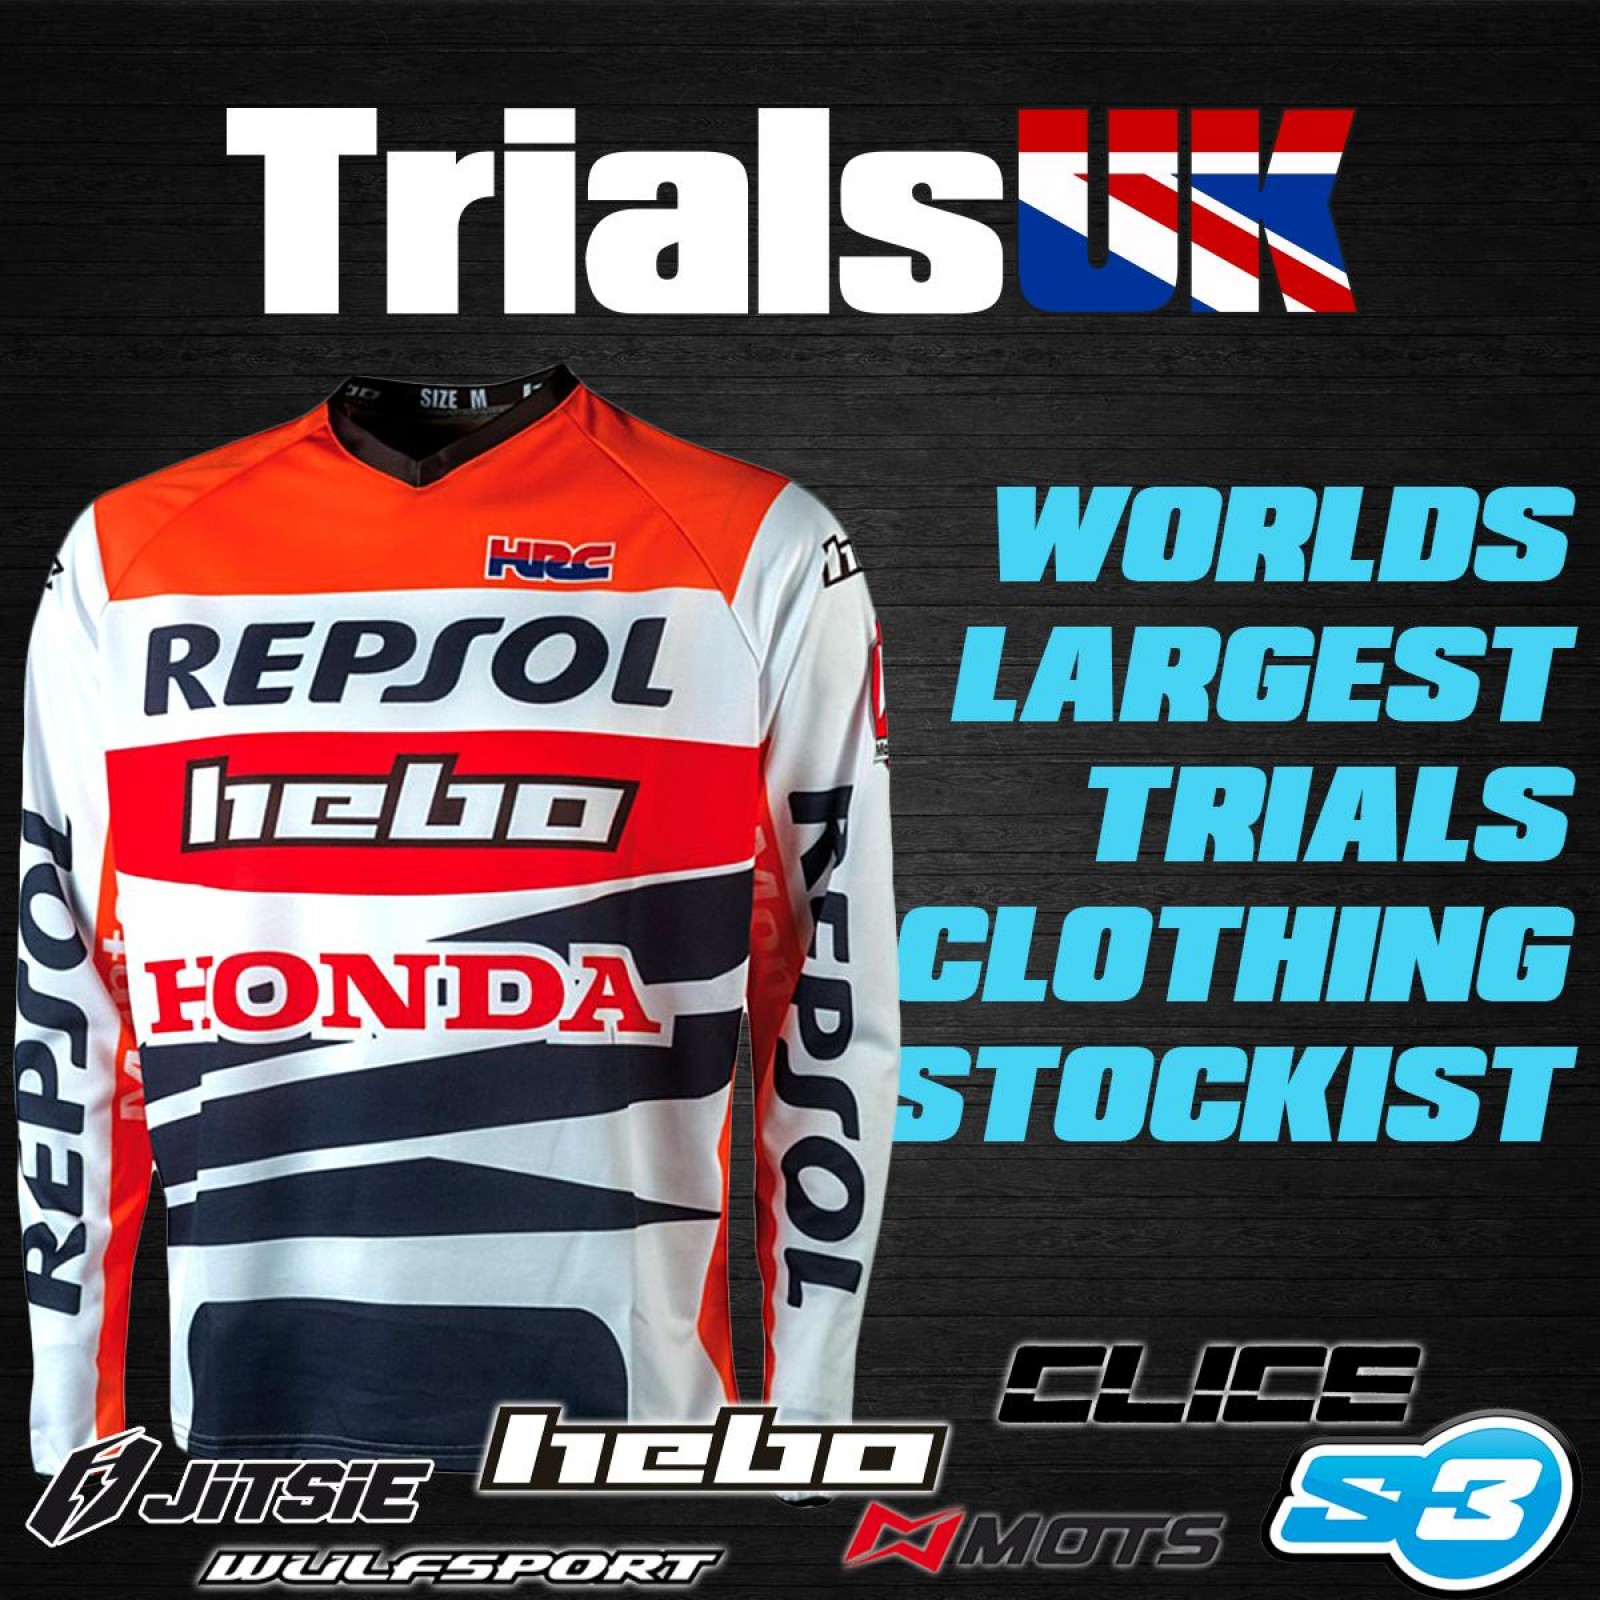 HEBO PRO RACE III TRIALS SHIRT BLUE 2019 DESIGN JERSEY TOP SIZE EXTRA LARGE